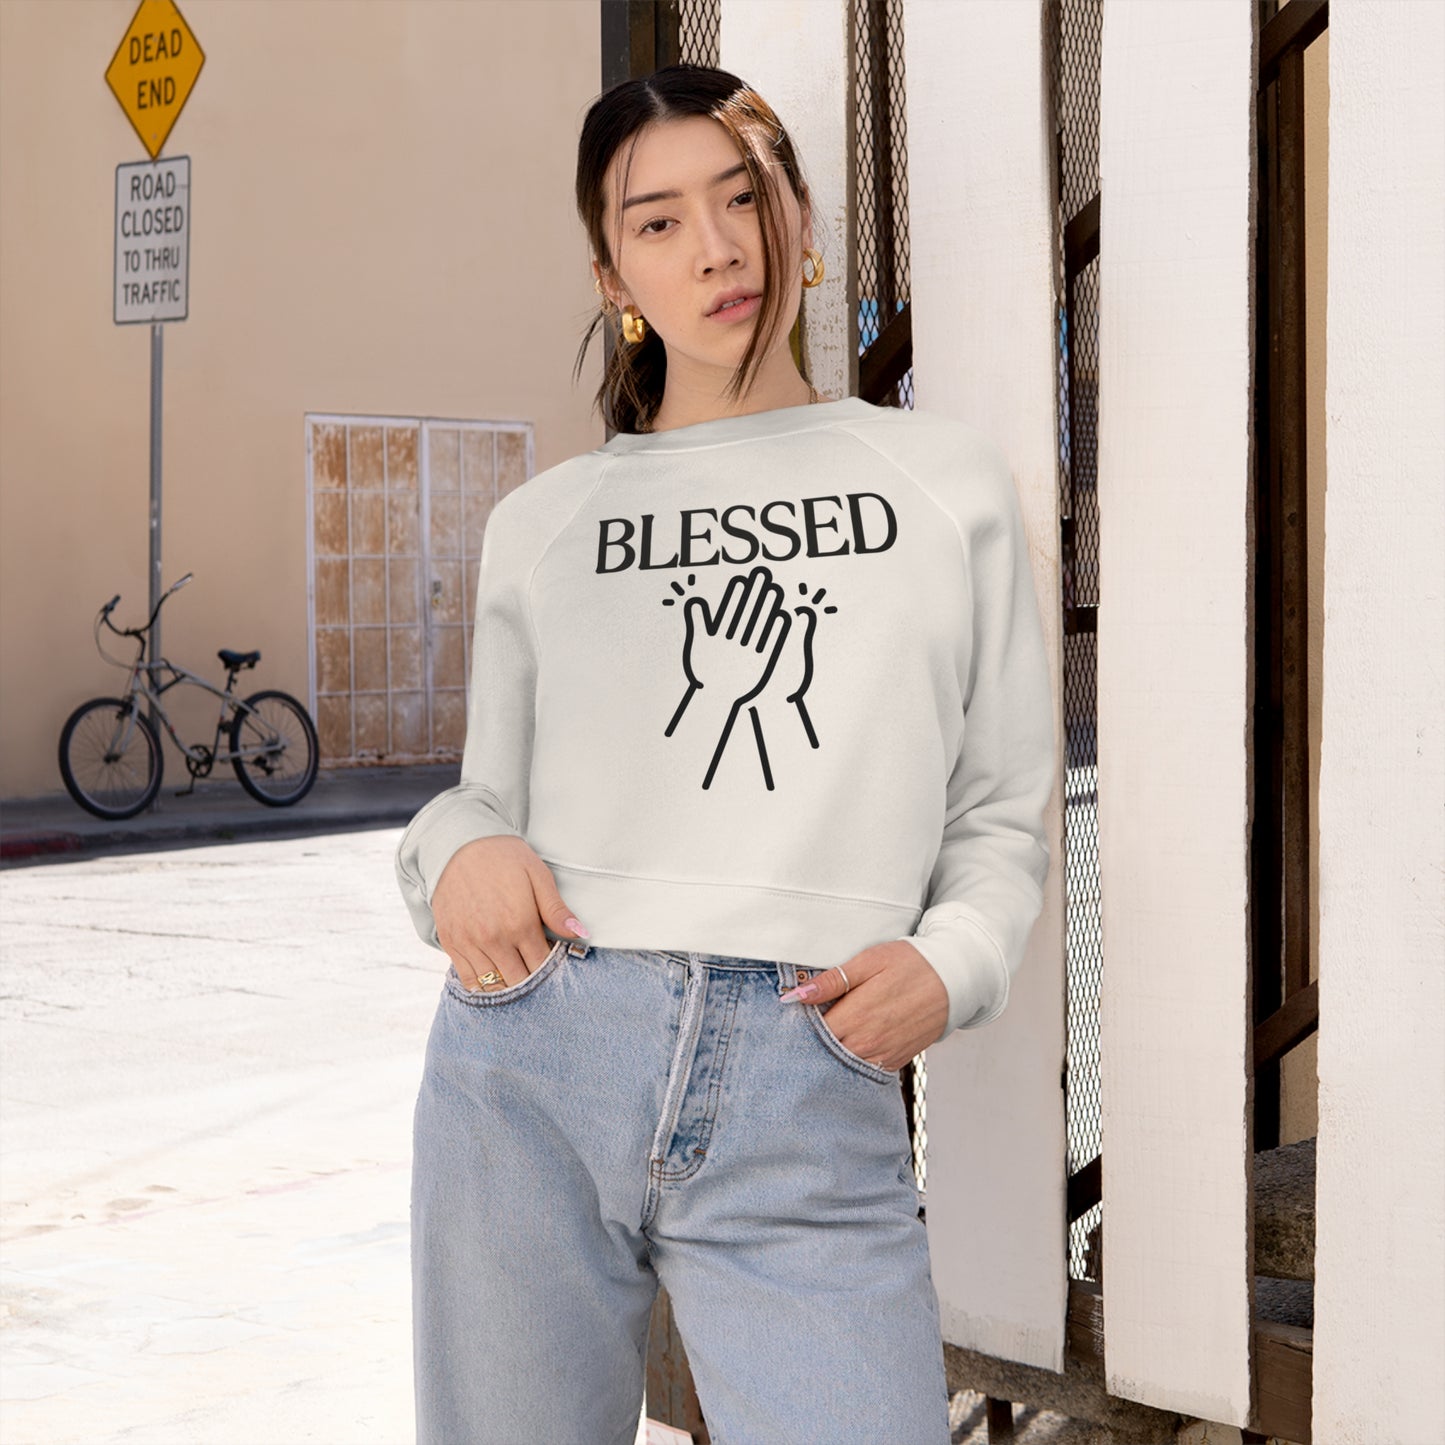 Called Blessed Women's Cropped Fleece Pullover